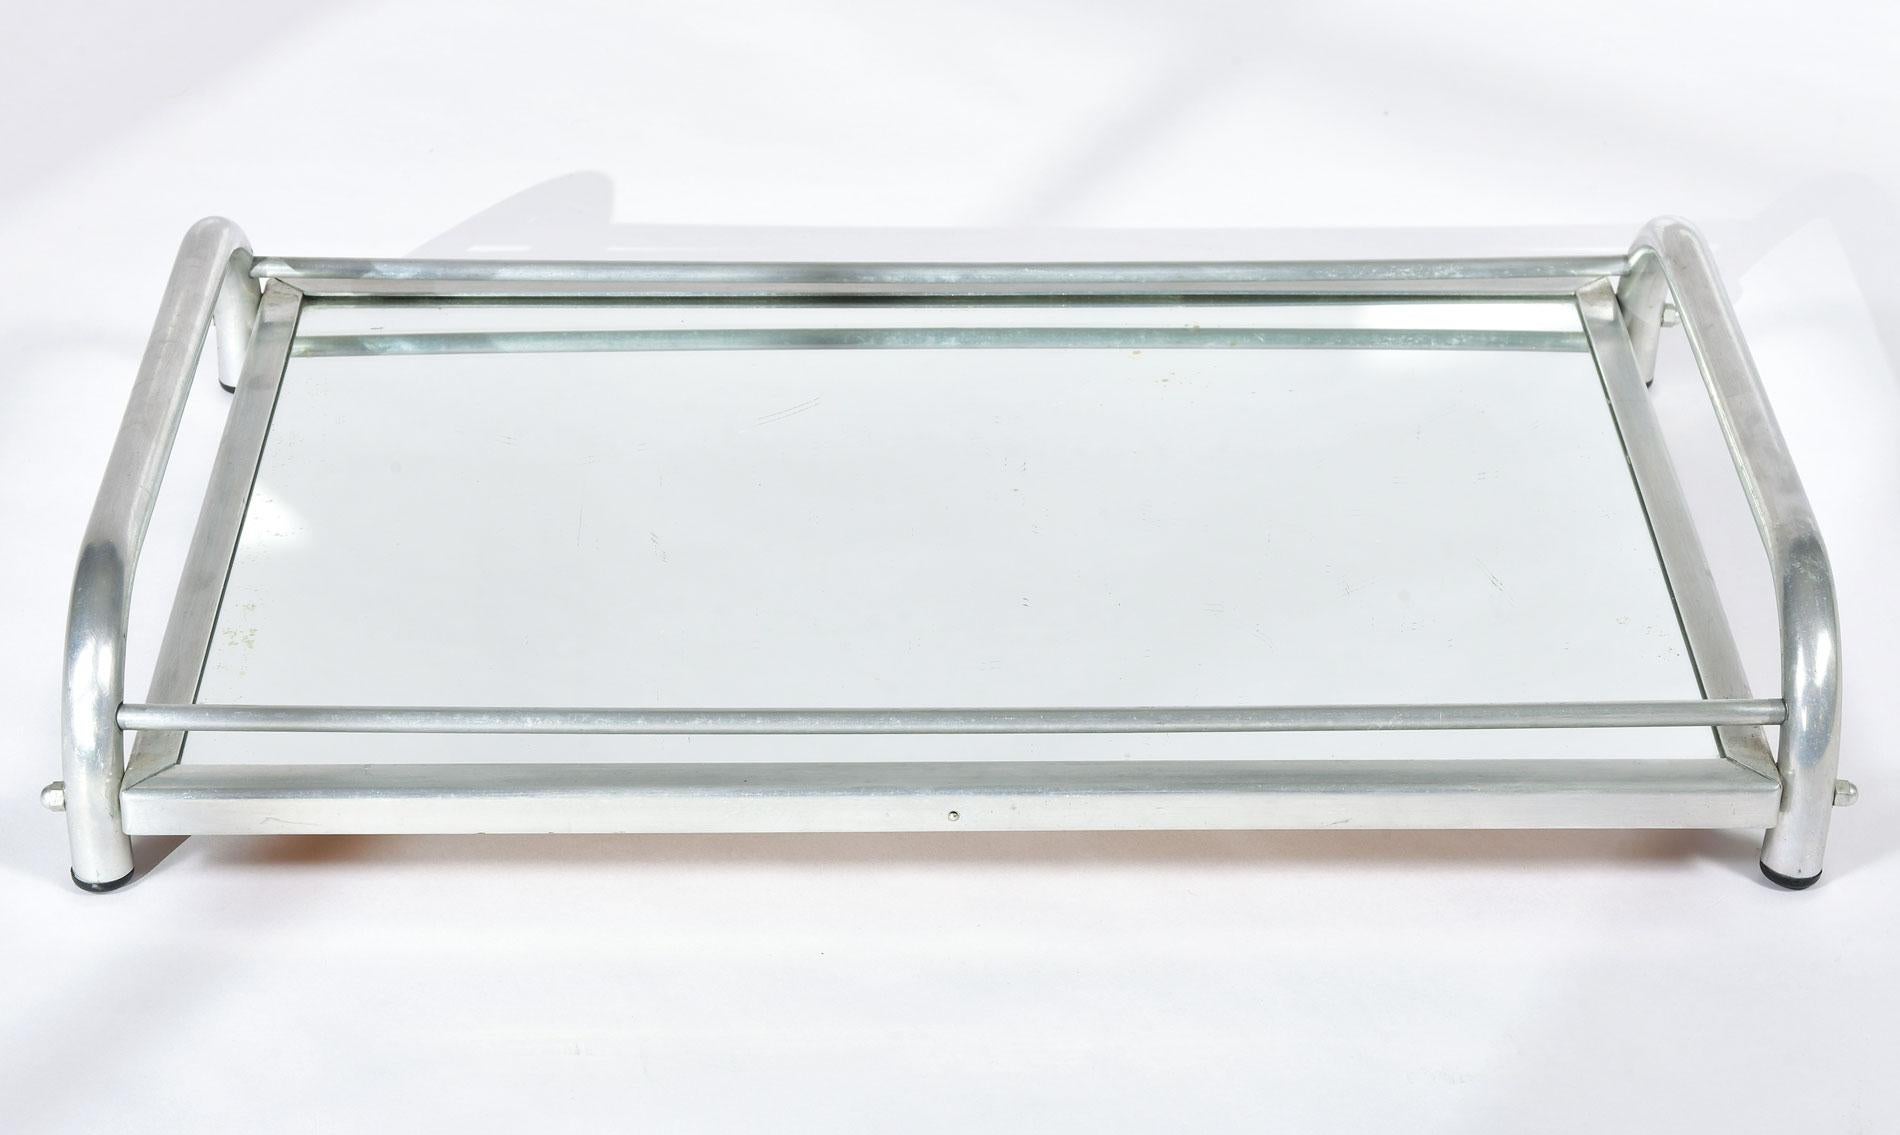 Chic mirrored tray in the style of Jacques Adnet. Simple tubular chrome handles with chrome frame and mirrored top.